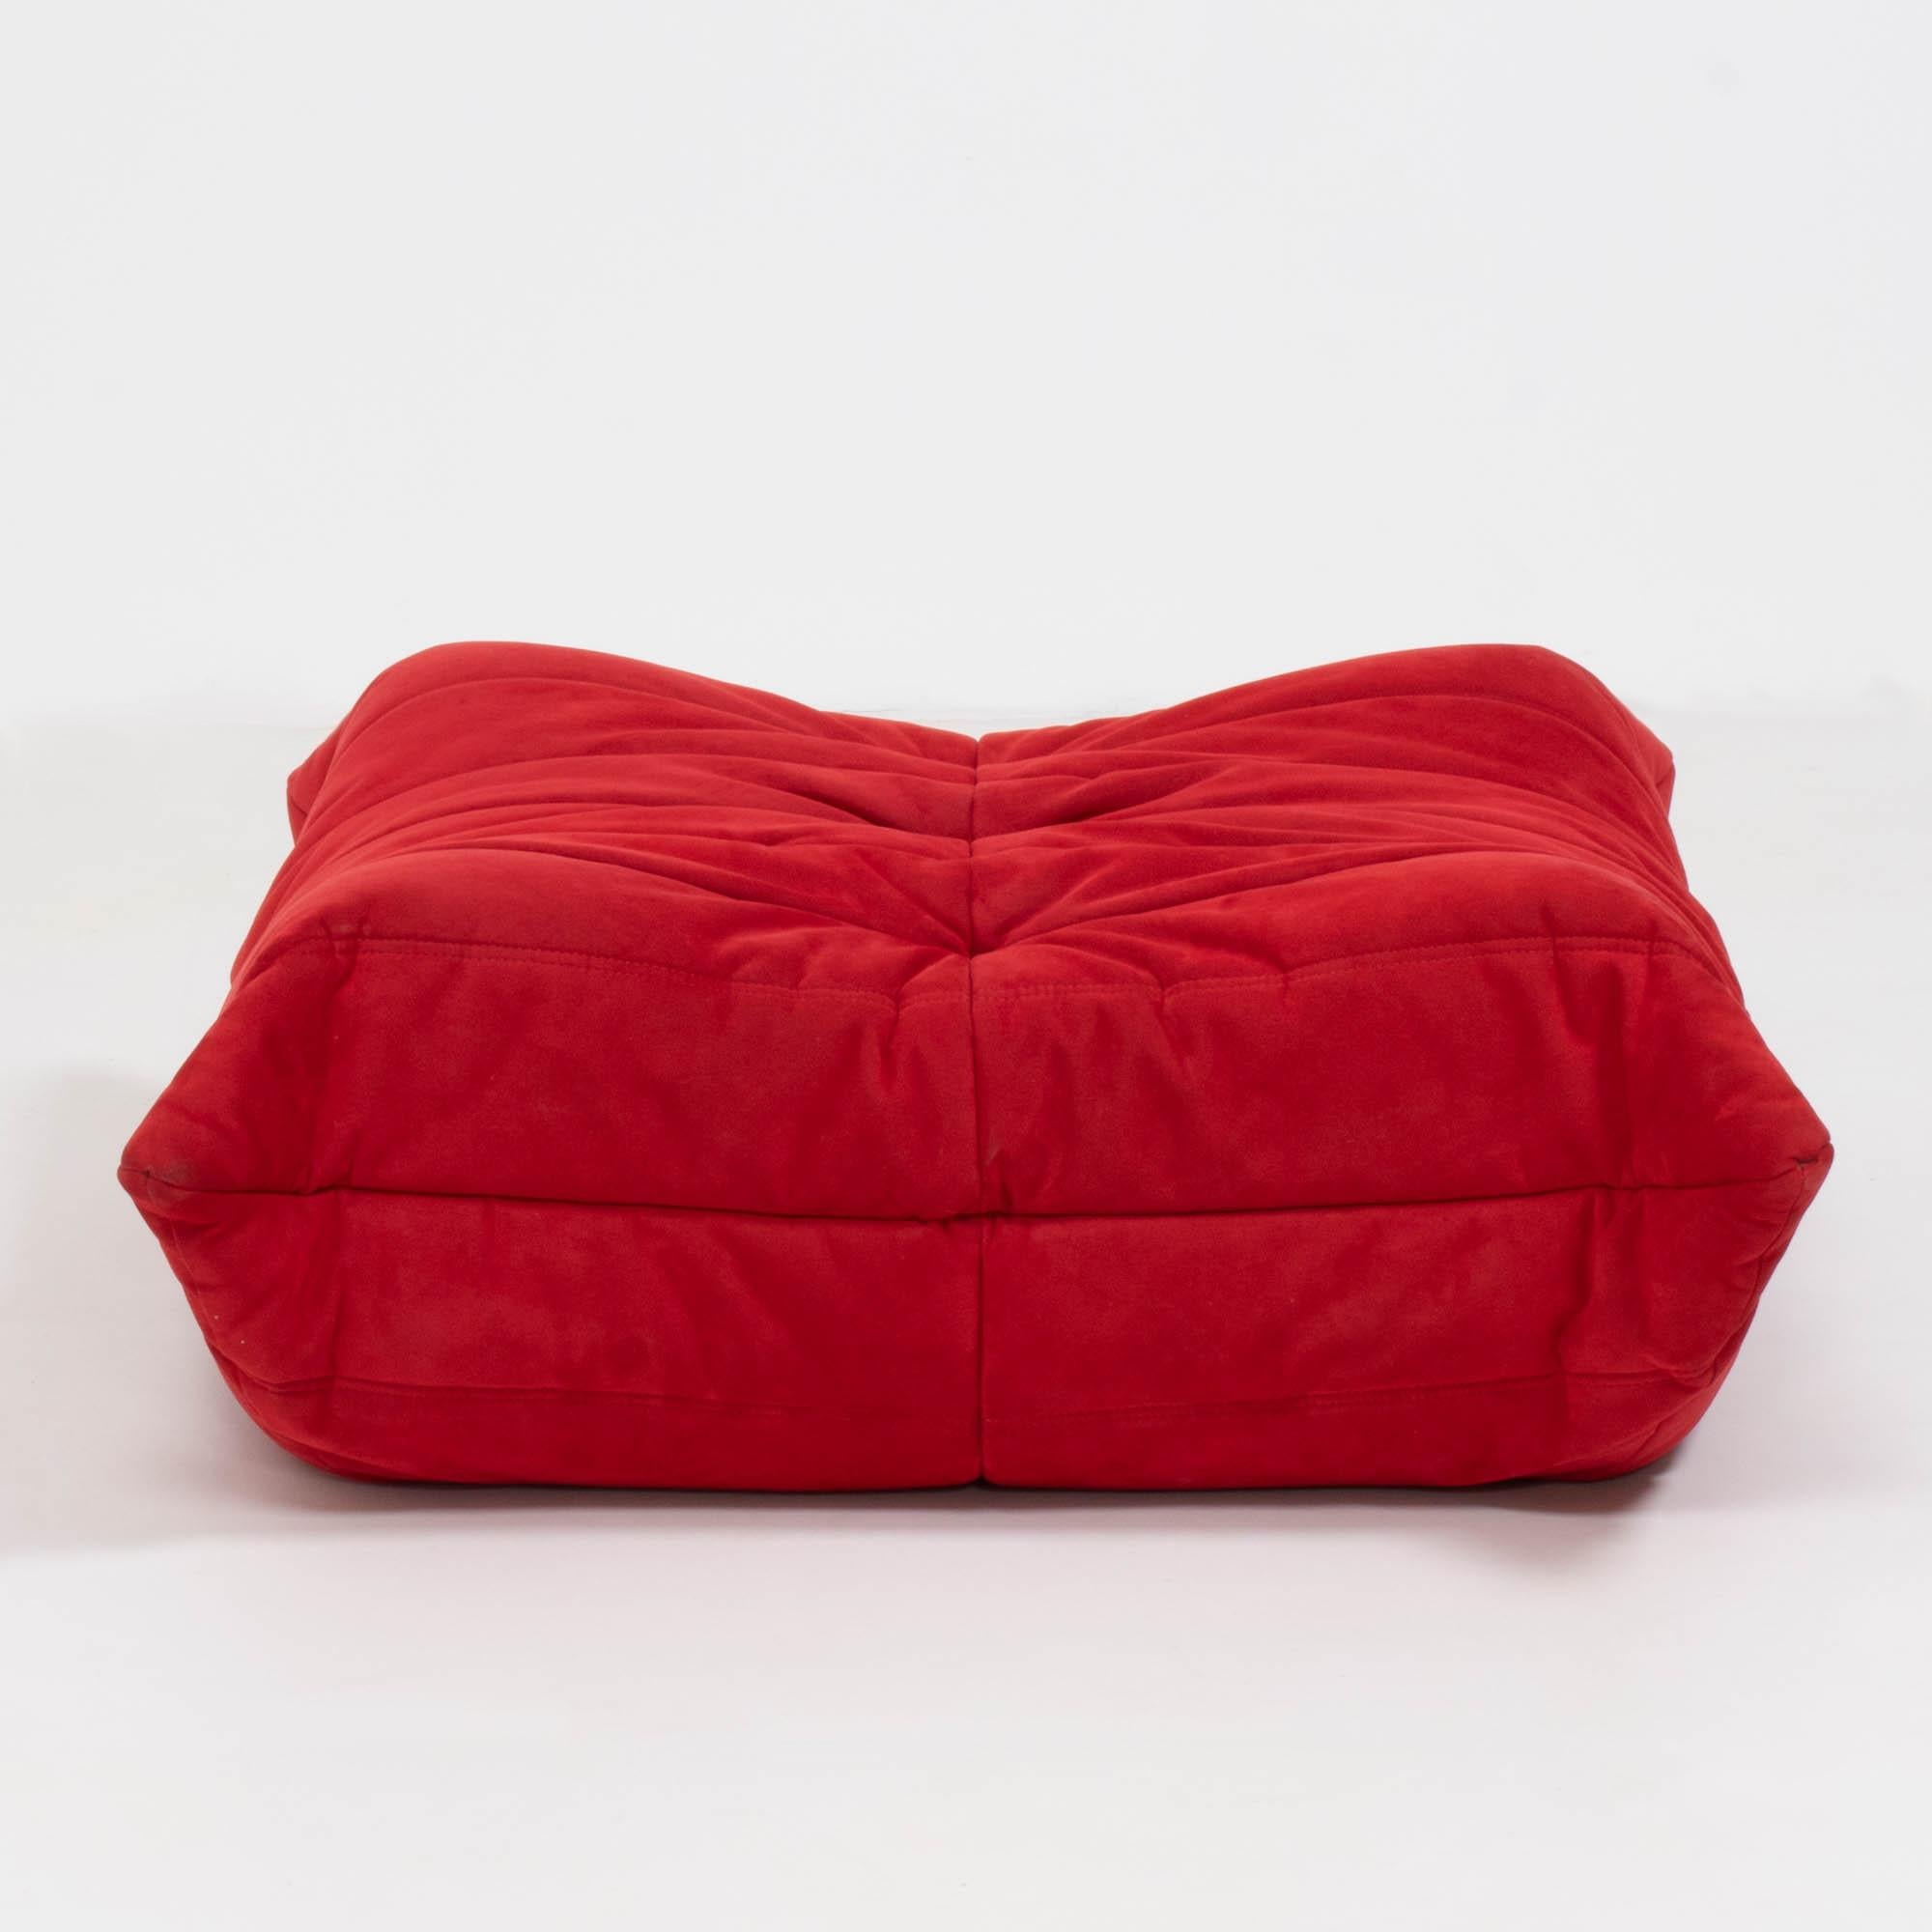 The iconic Togo sofa, originally designed by Michel Ducaroy for Ligne Roset in 1973 has become a design Classic.

The footstool features the original red suede upholstery and the instantly recognizable pleated fabric design, which gives the sofa